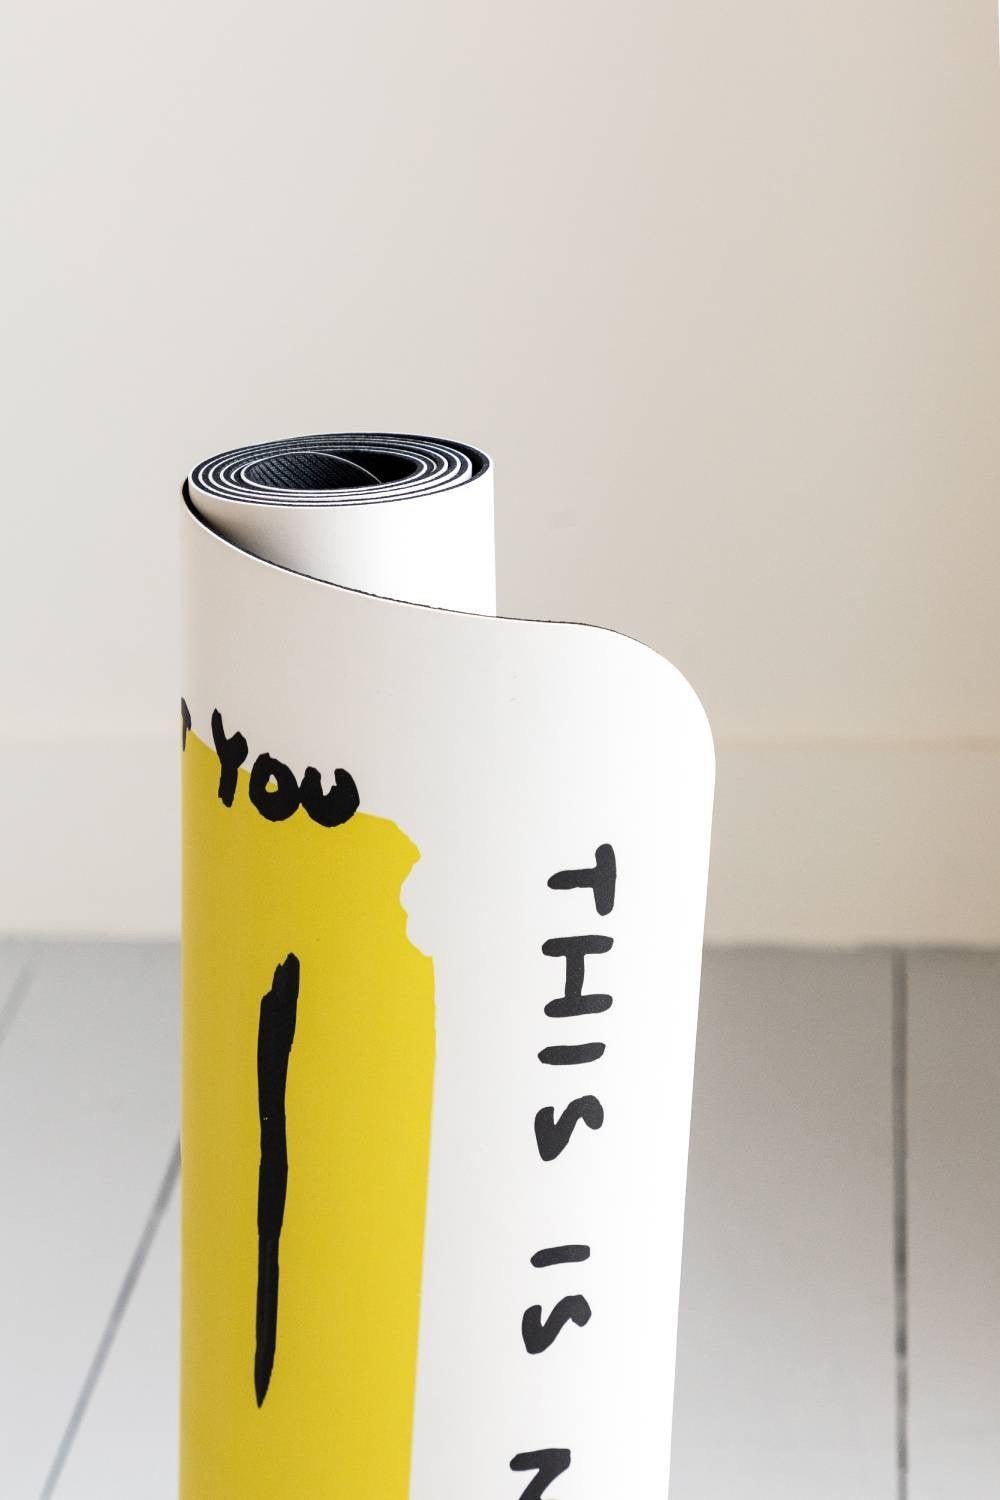 This is not what I wanted ... (Yoga Mat) - Contemporary Mixed Media Art by David Shrigley